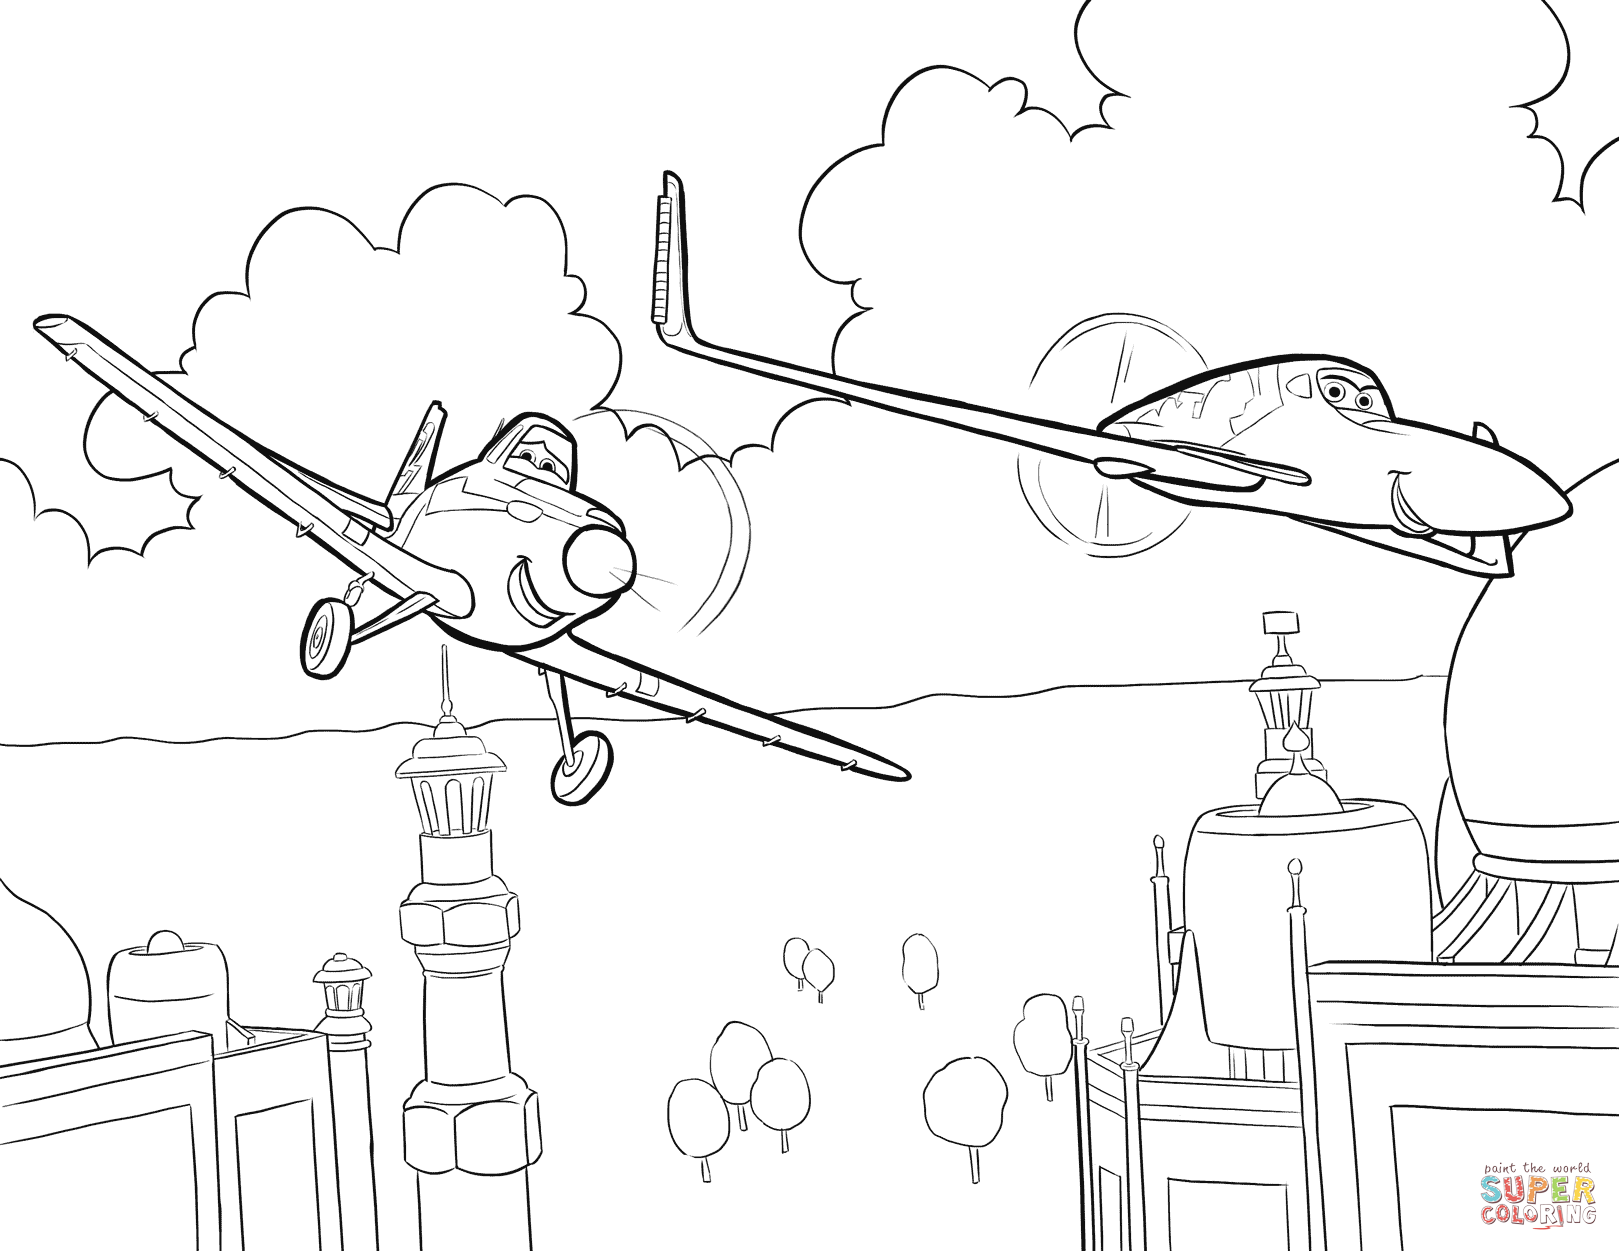 Dusty crophopper flies with ishani coloring page free printable coloring pages